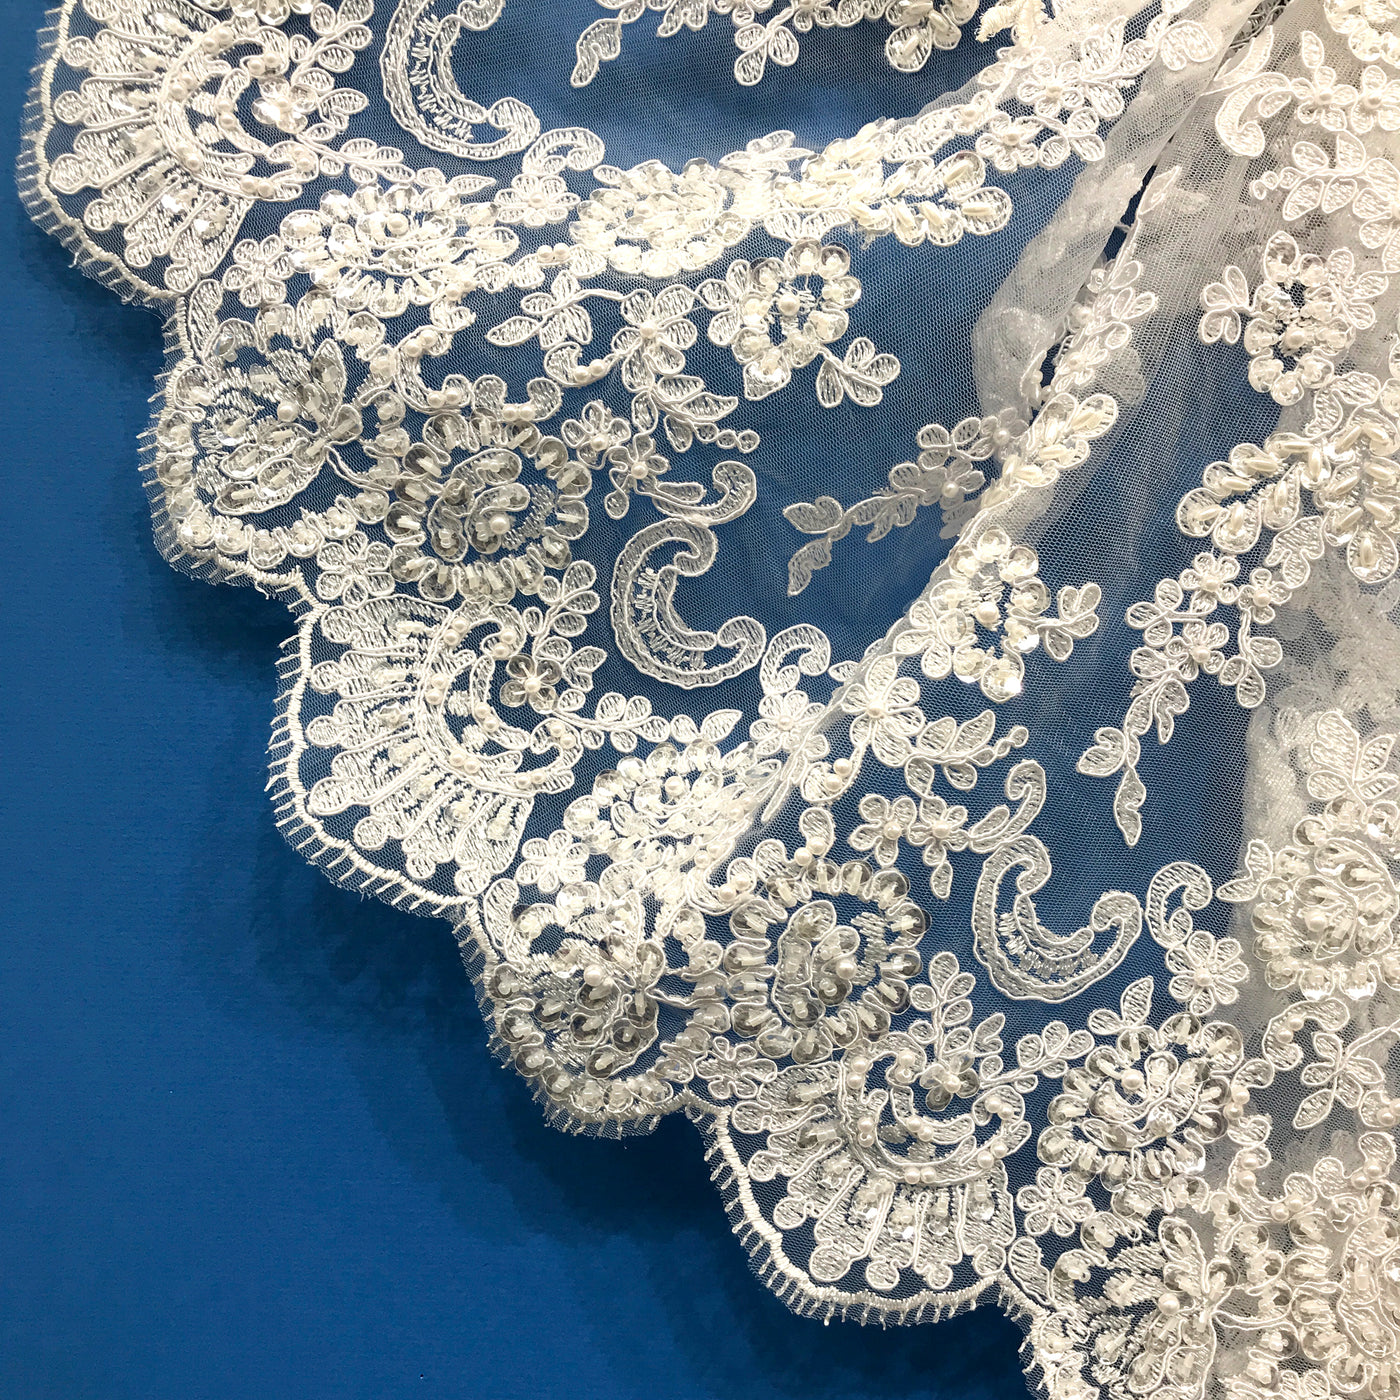 Beaded & Corded Double Sided Floral Lace Trimming Embroidered on 100% Polyester Net Mesh | Lace USA - 96851W-BP/2